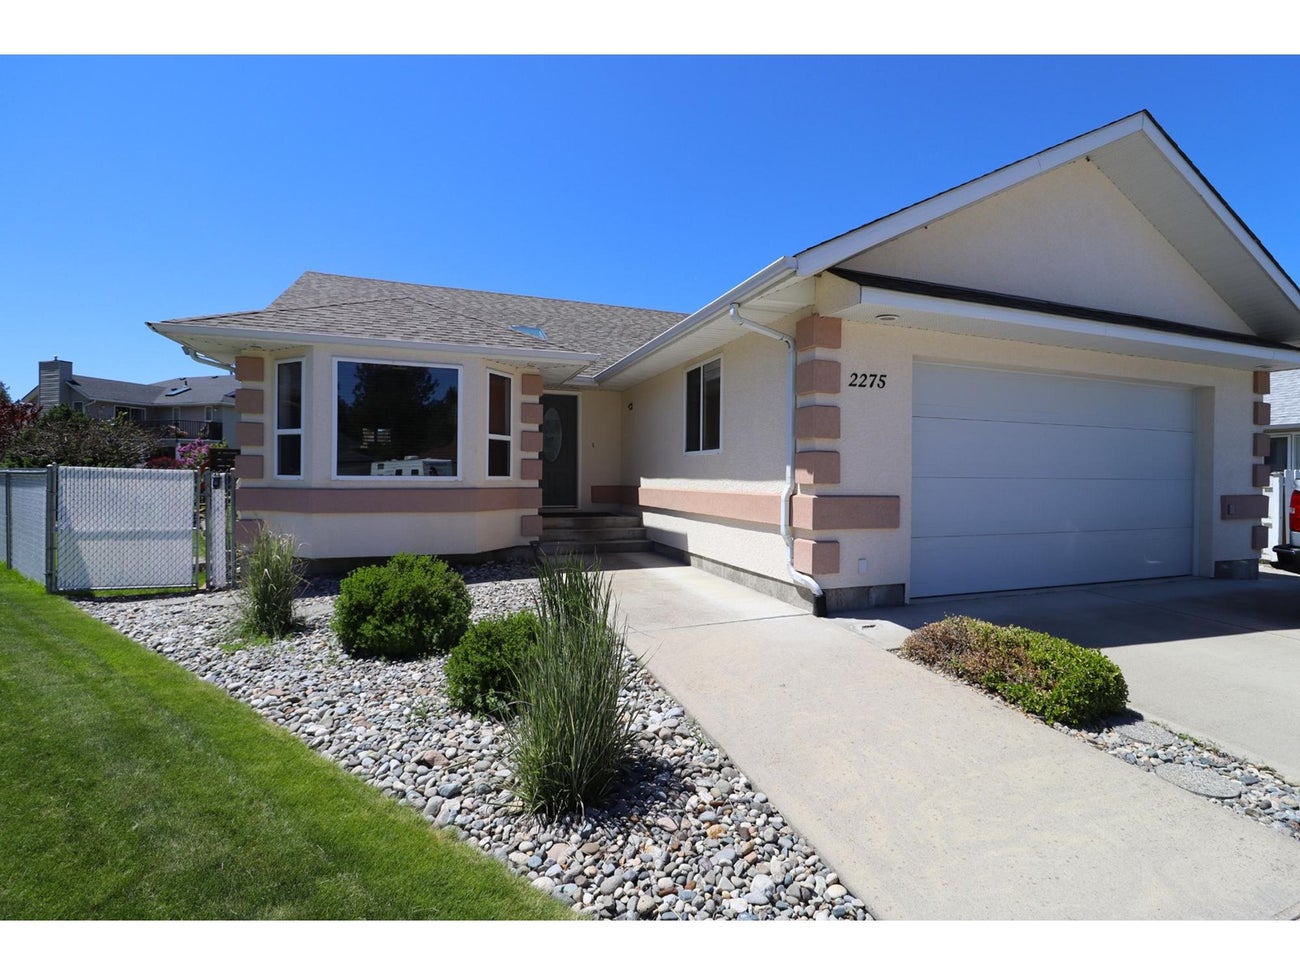 2275 SELKIRK PLACE - Grand Forks House for sale, 2 Bedrooms (2475431) #1